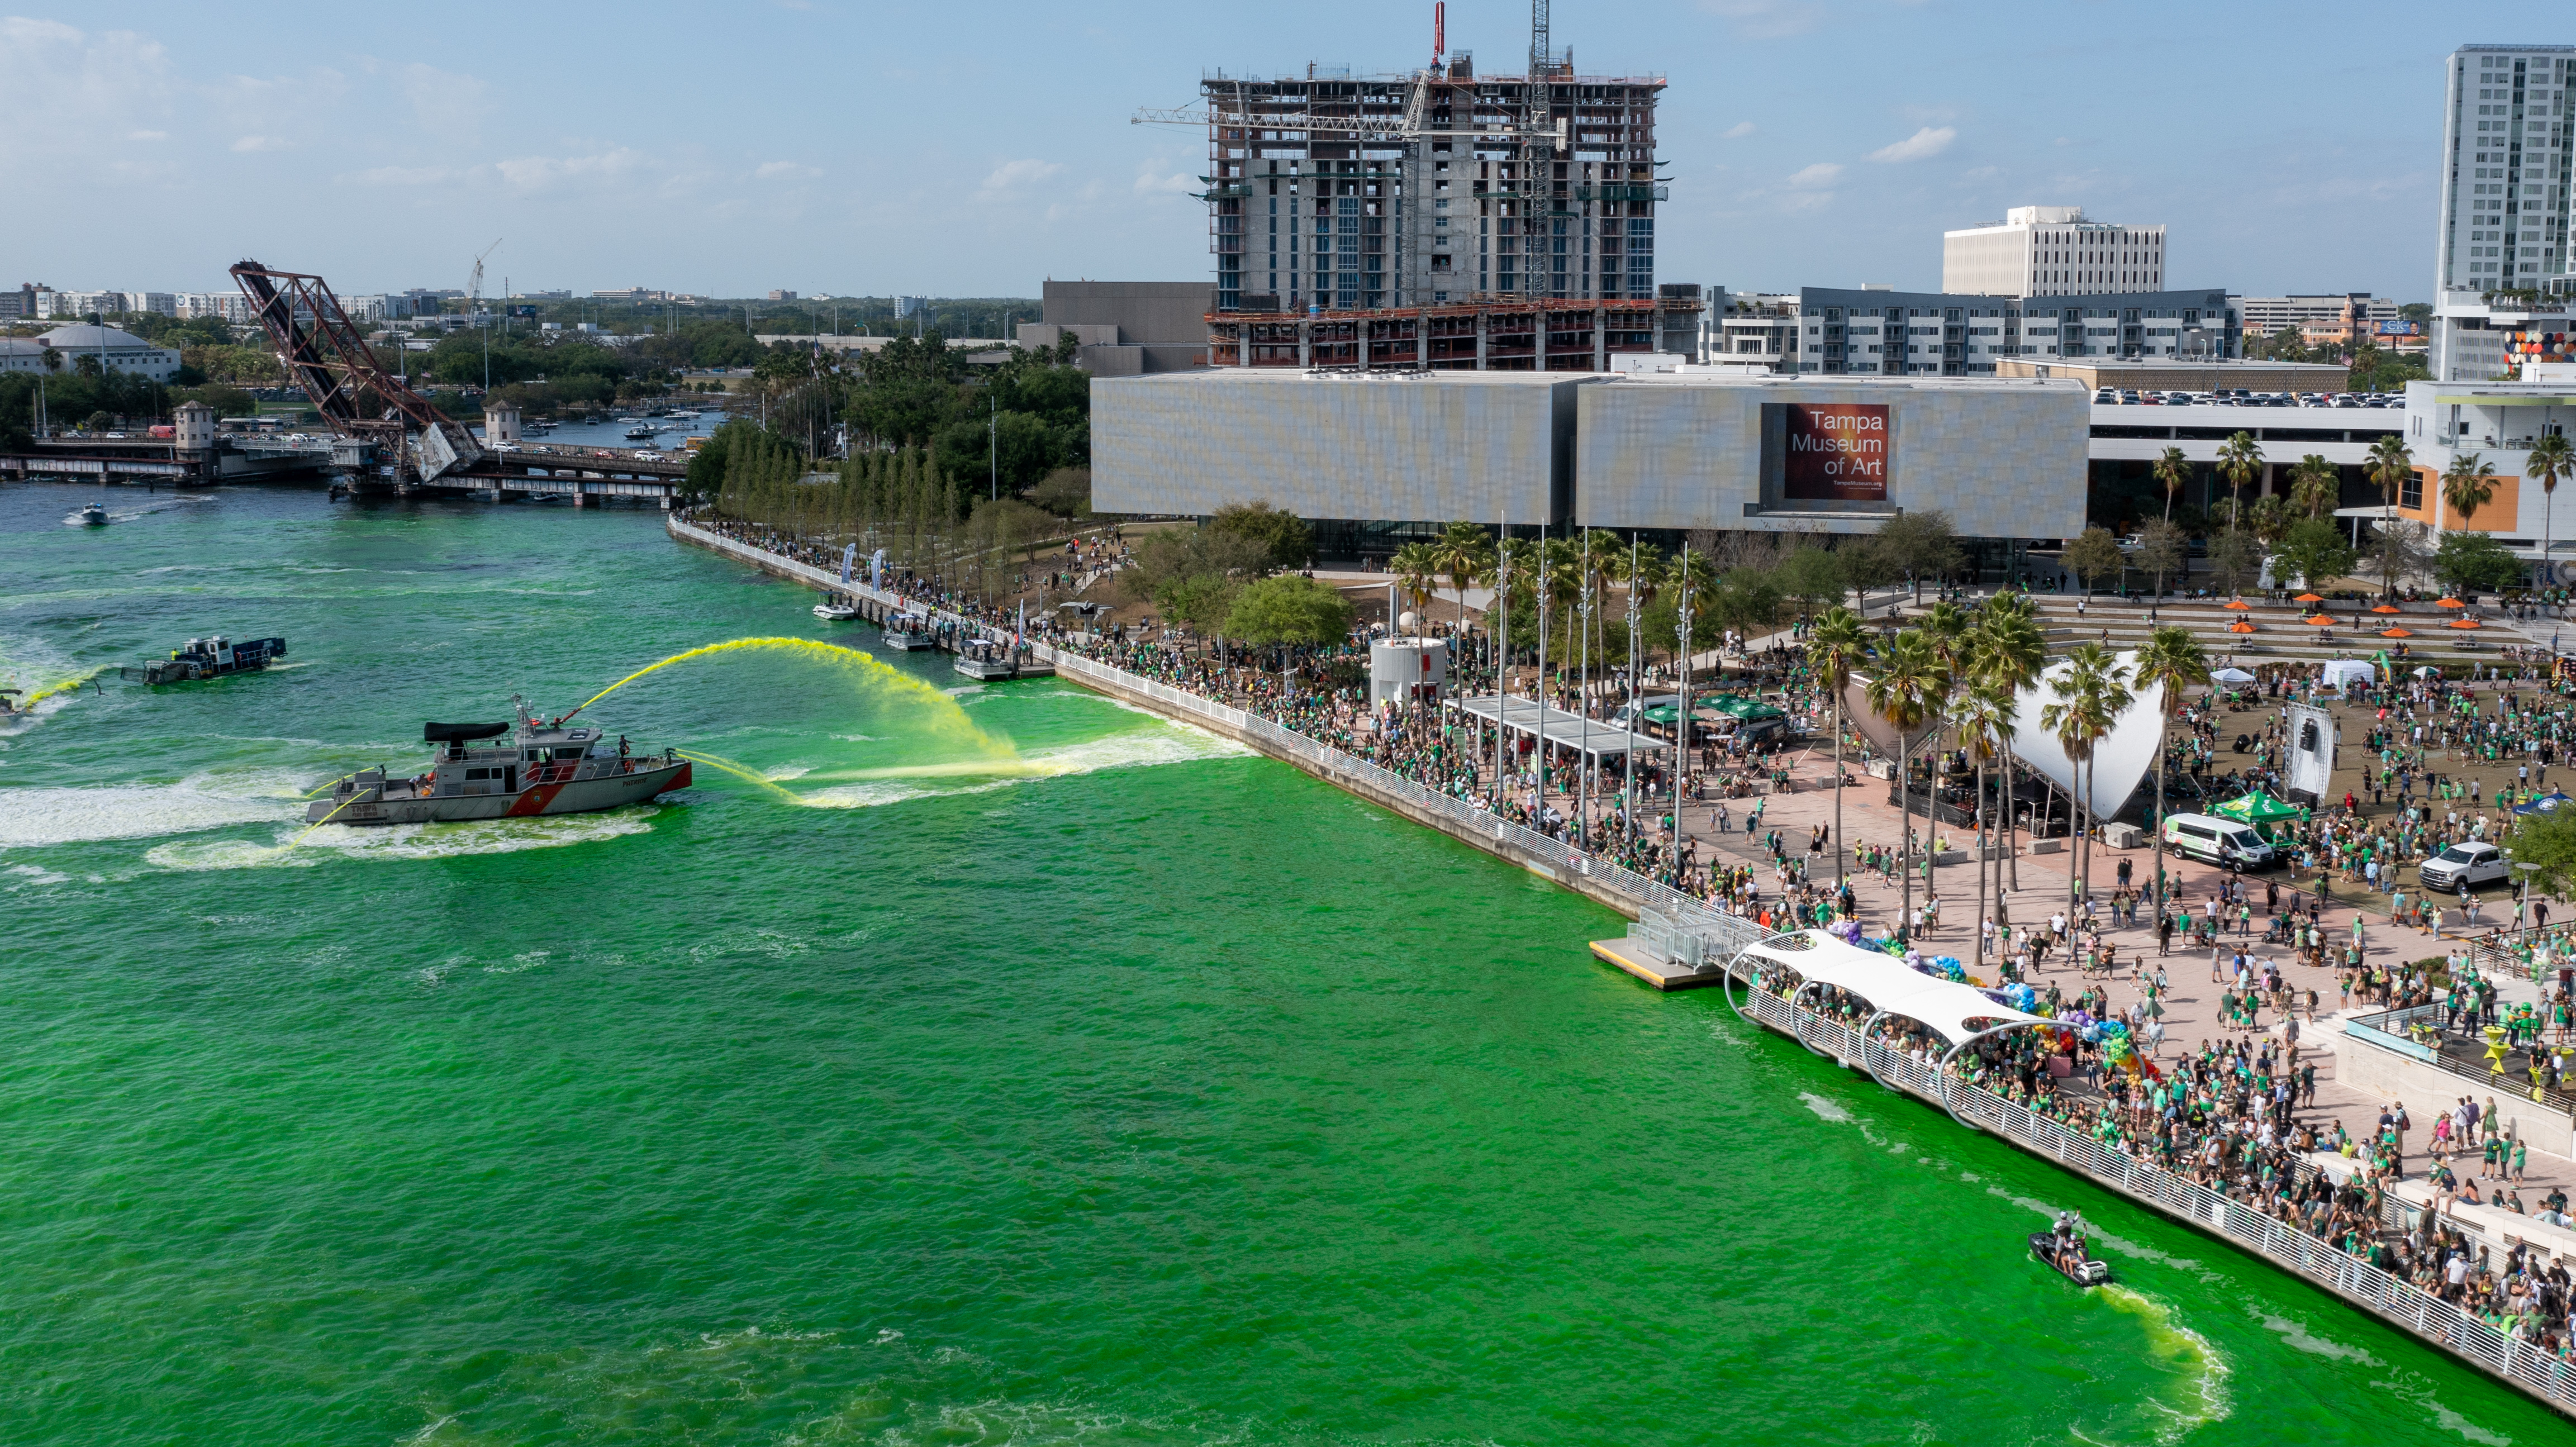 Tampa's St. Patrick's Day parade moves downtown, leaving Ybor